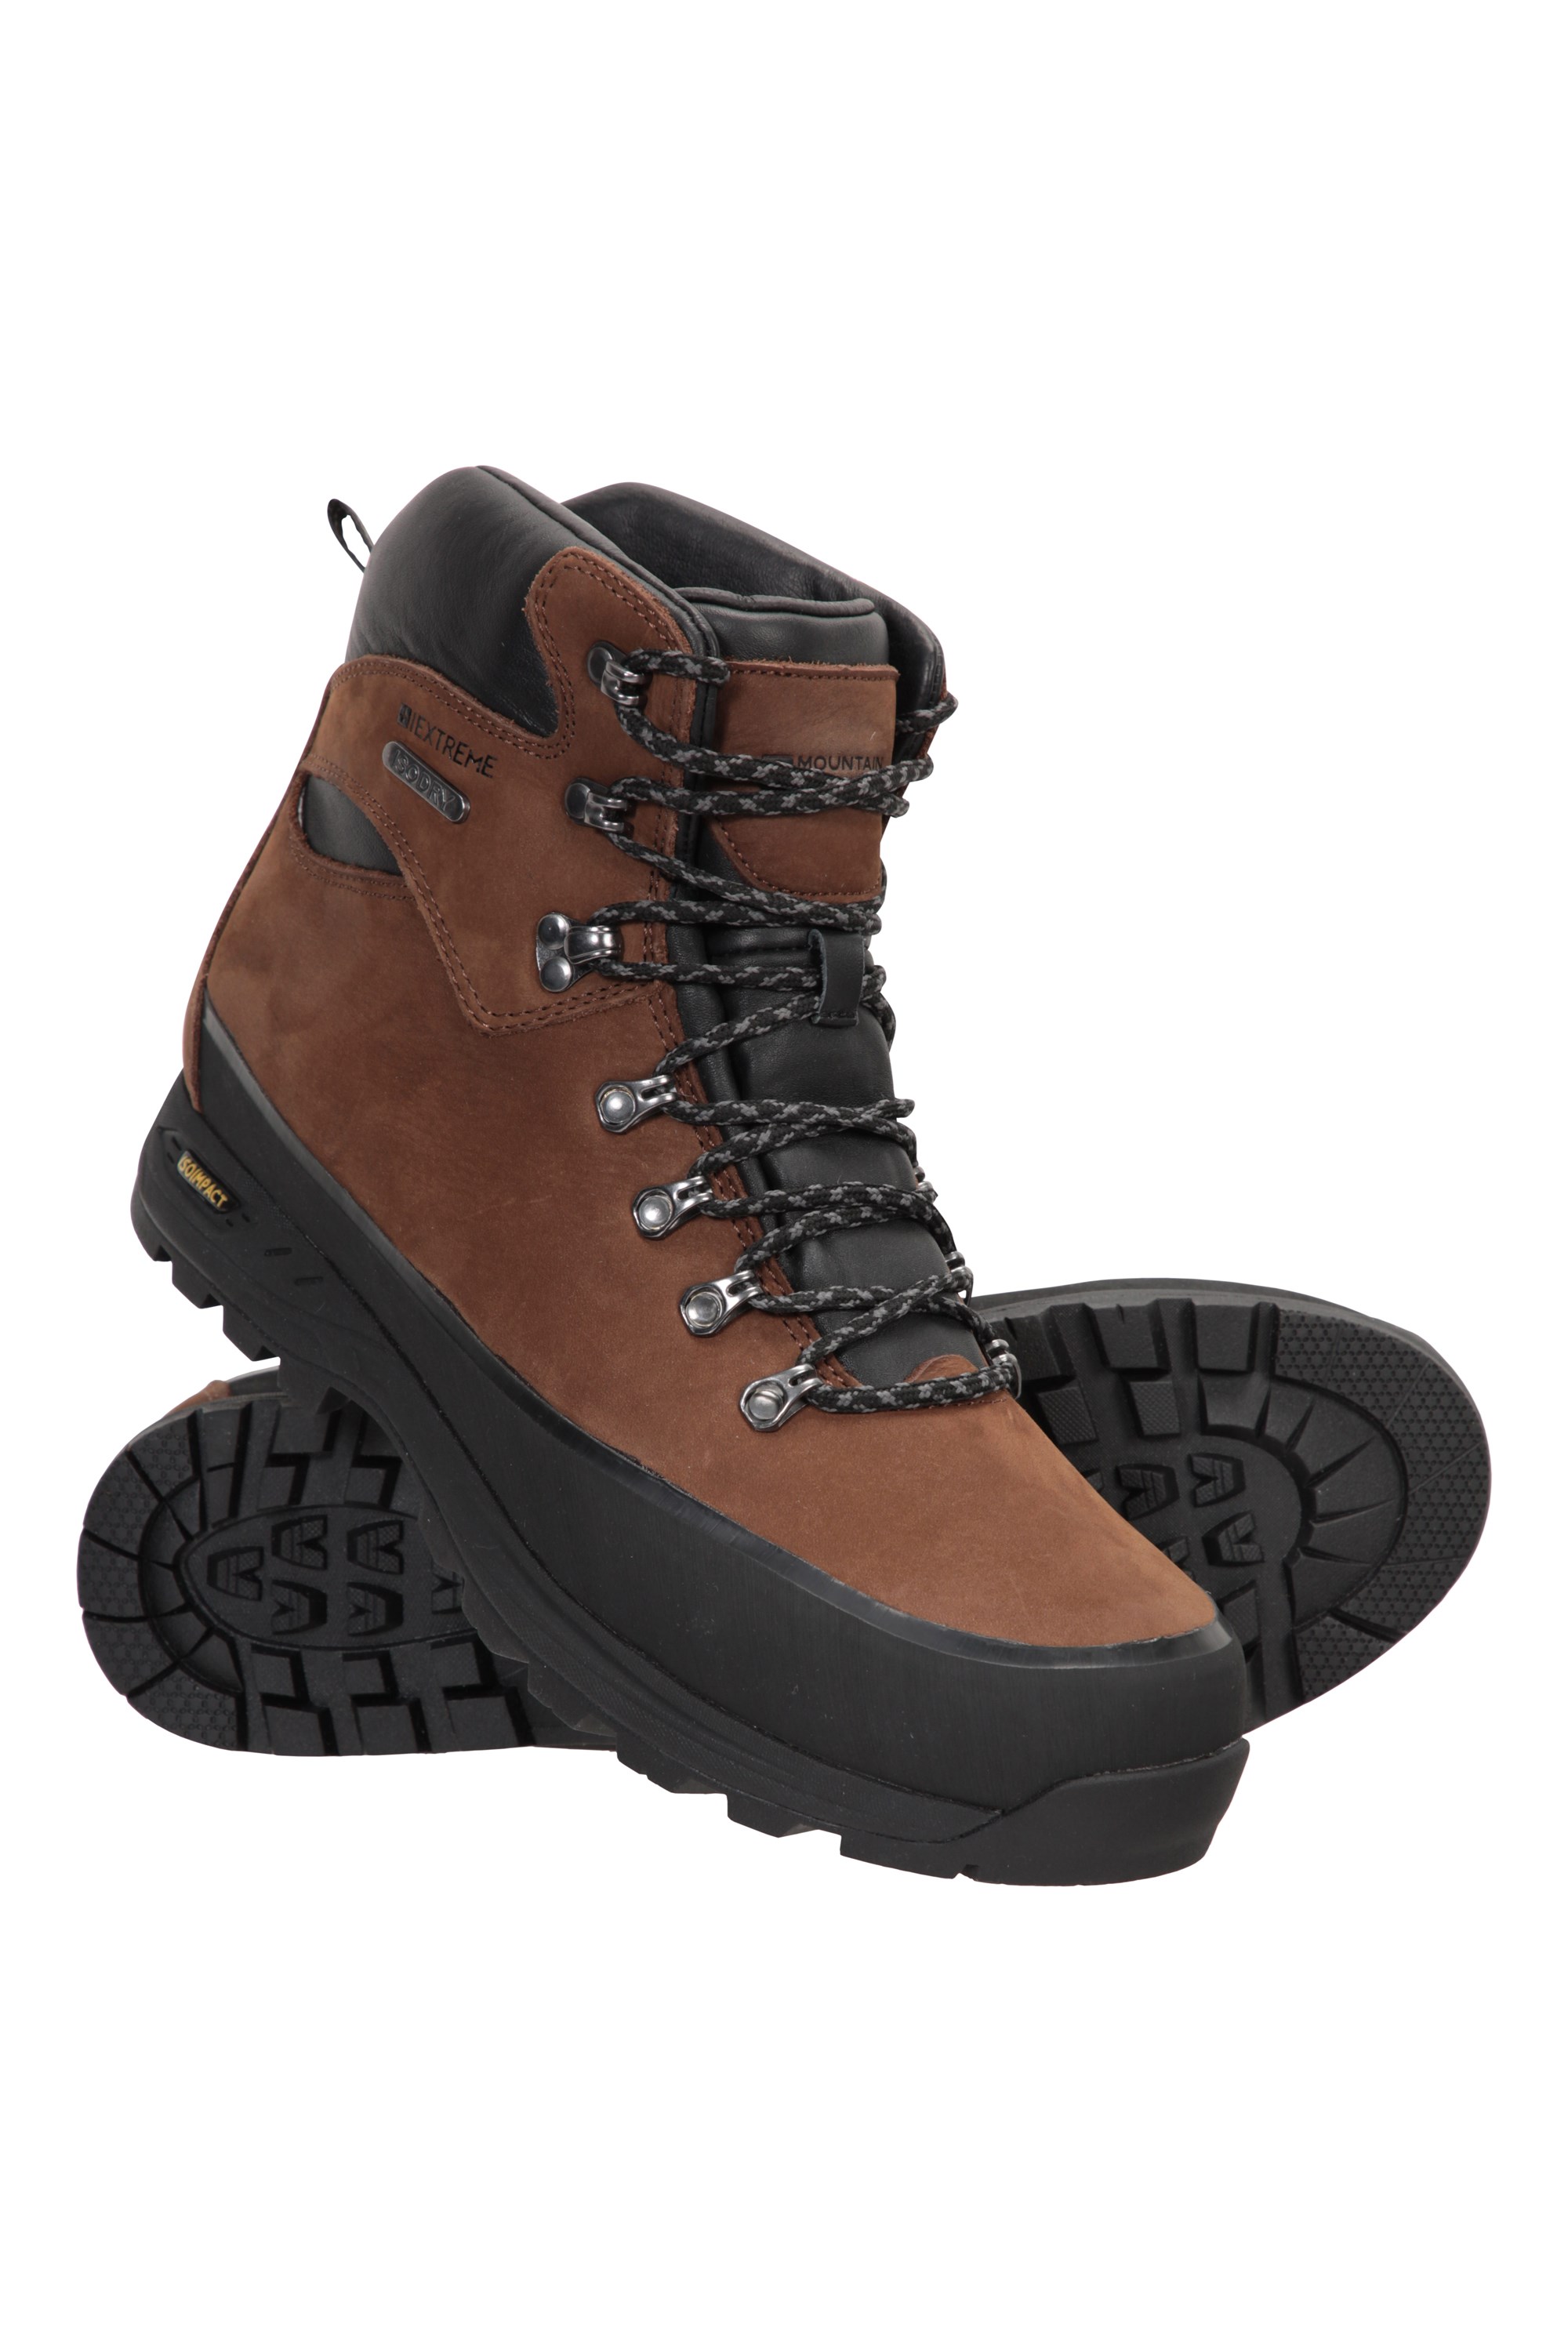 Quest Mens Isogrip Leather Waterproof Hiking Boots - Brown